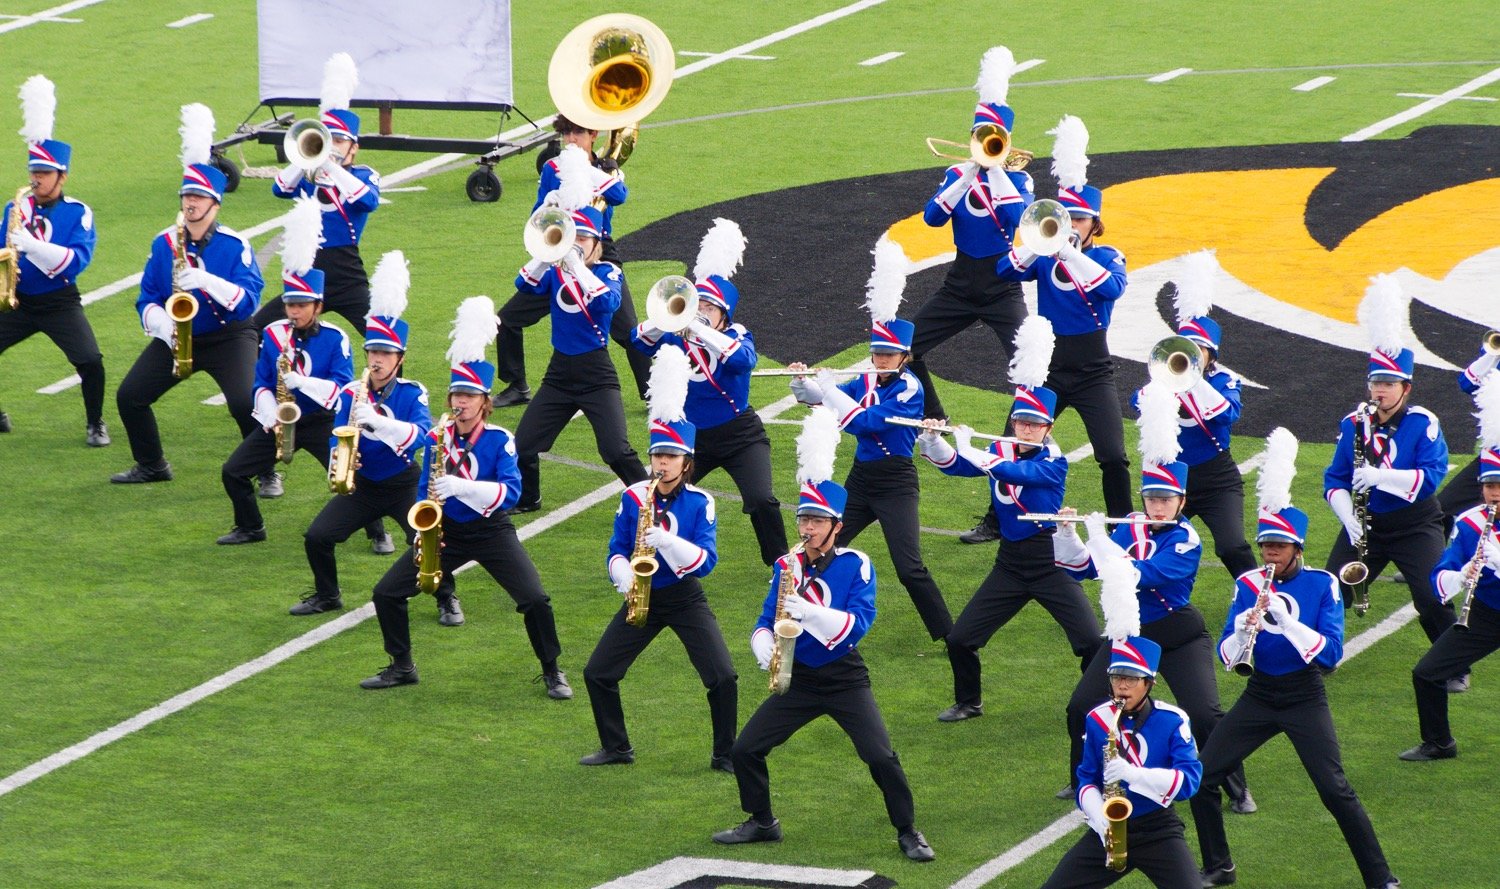 The Quitman High School Proud Blue Marching Band performed at the region marching competition Tuesday morning in Mt. Pleasant and advanced to area with a first division rating.